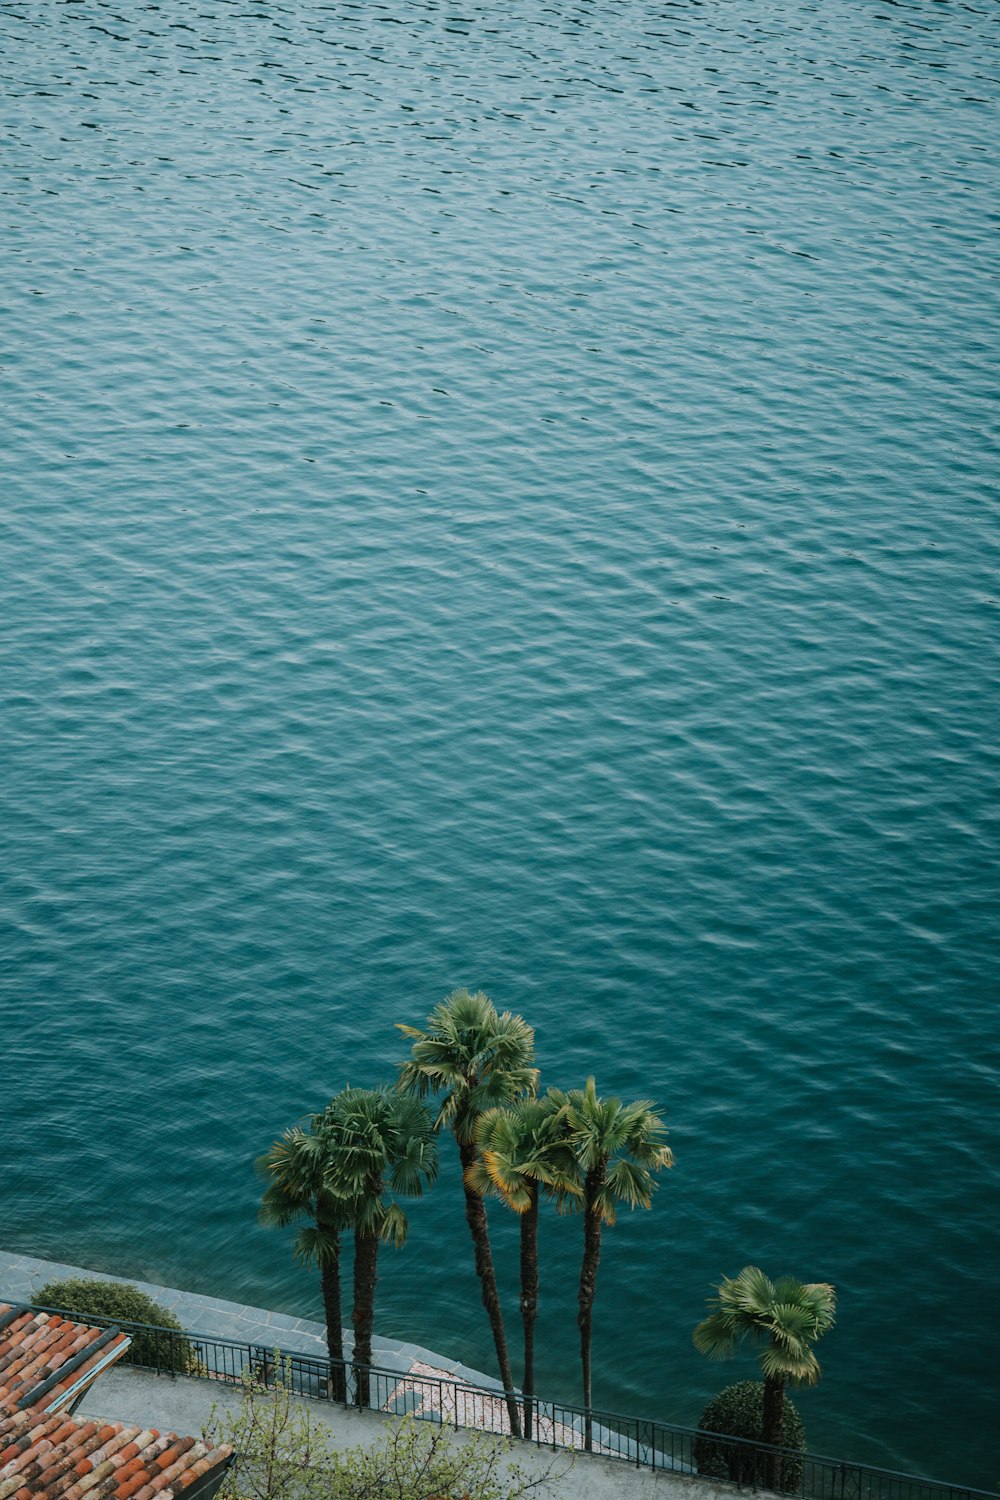 three palm trees in front of a body of water